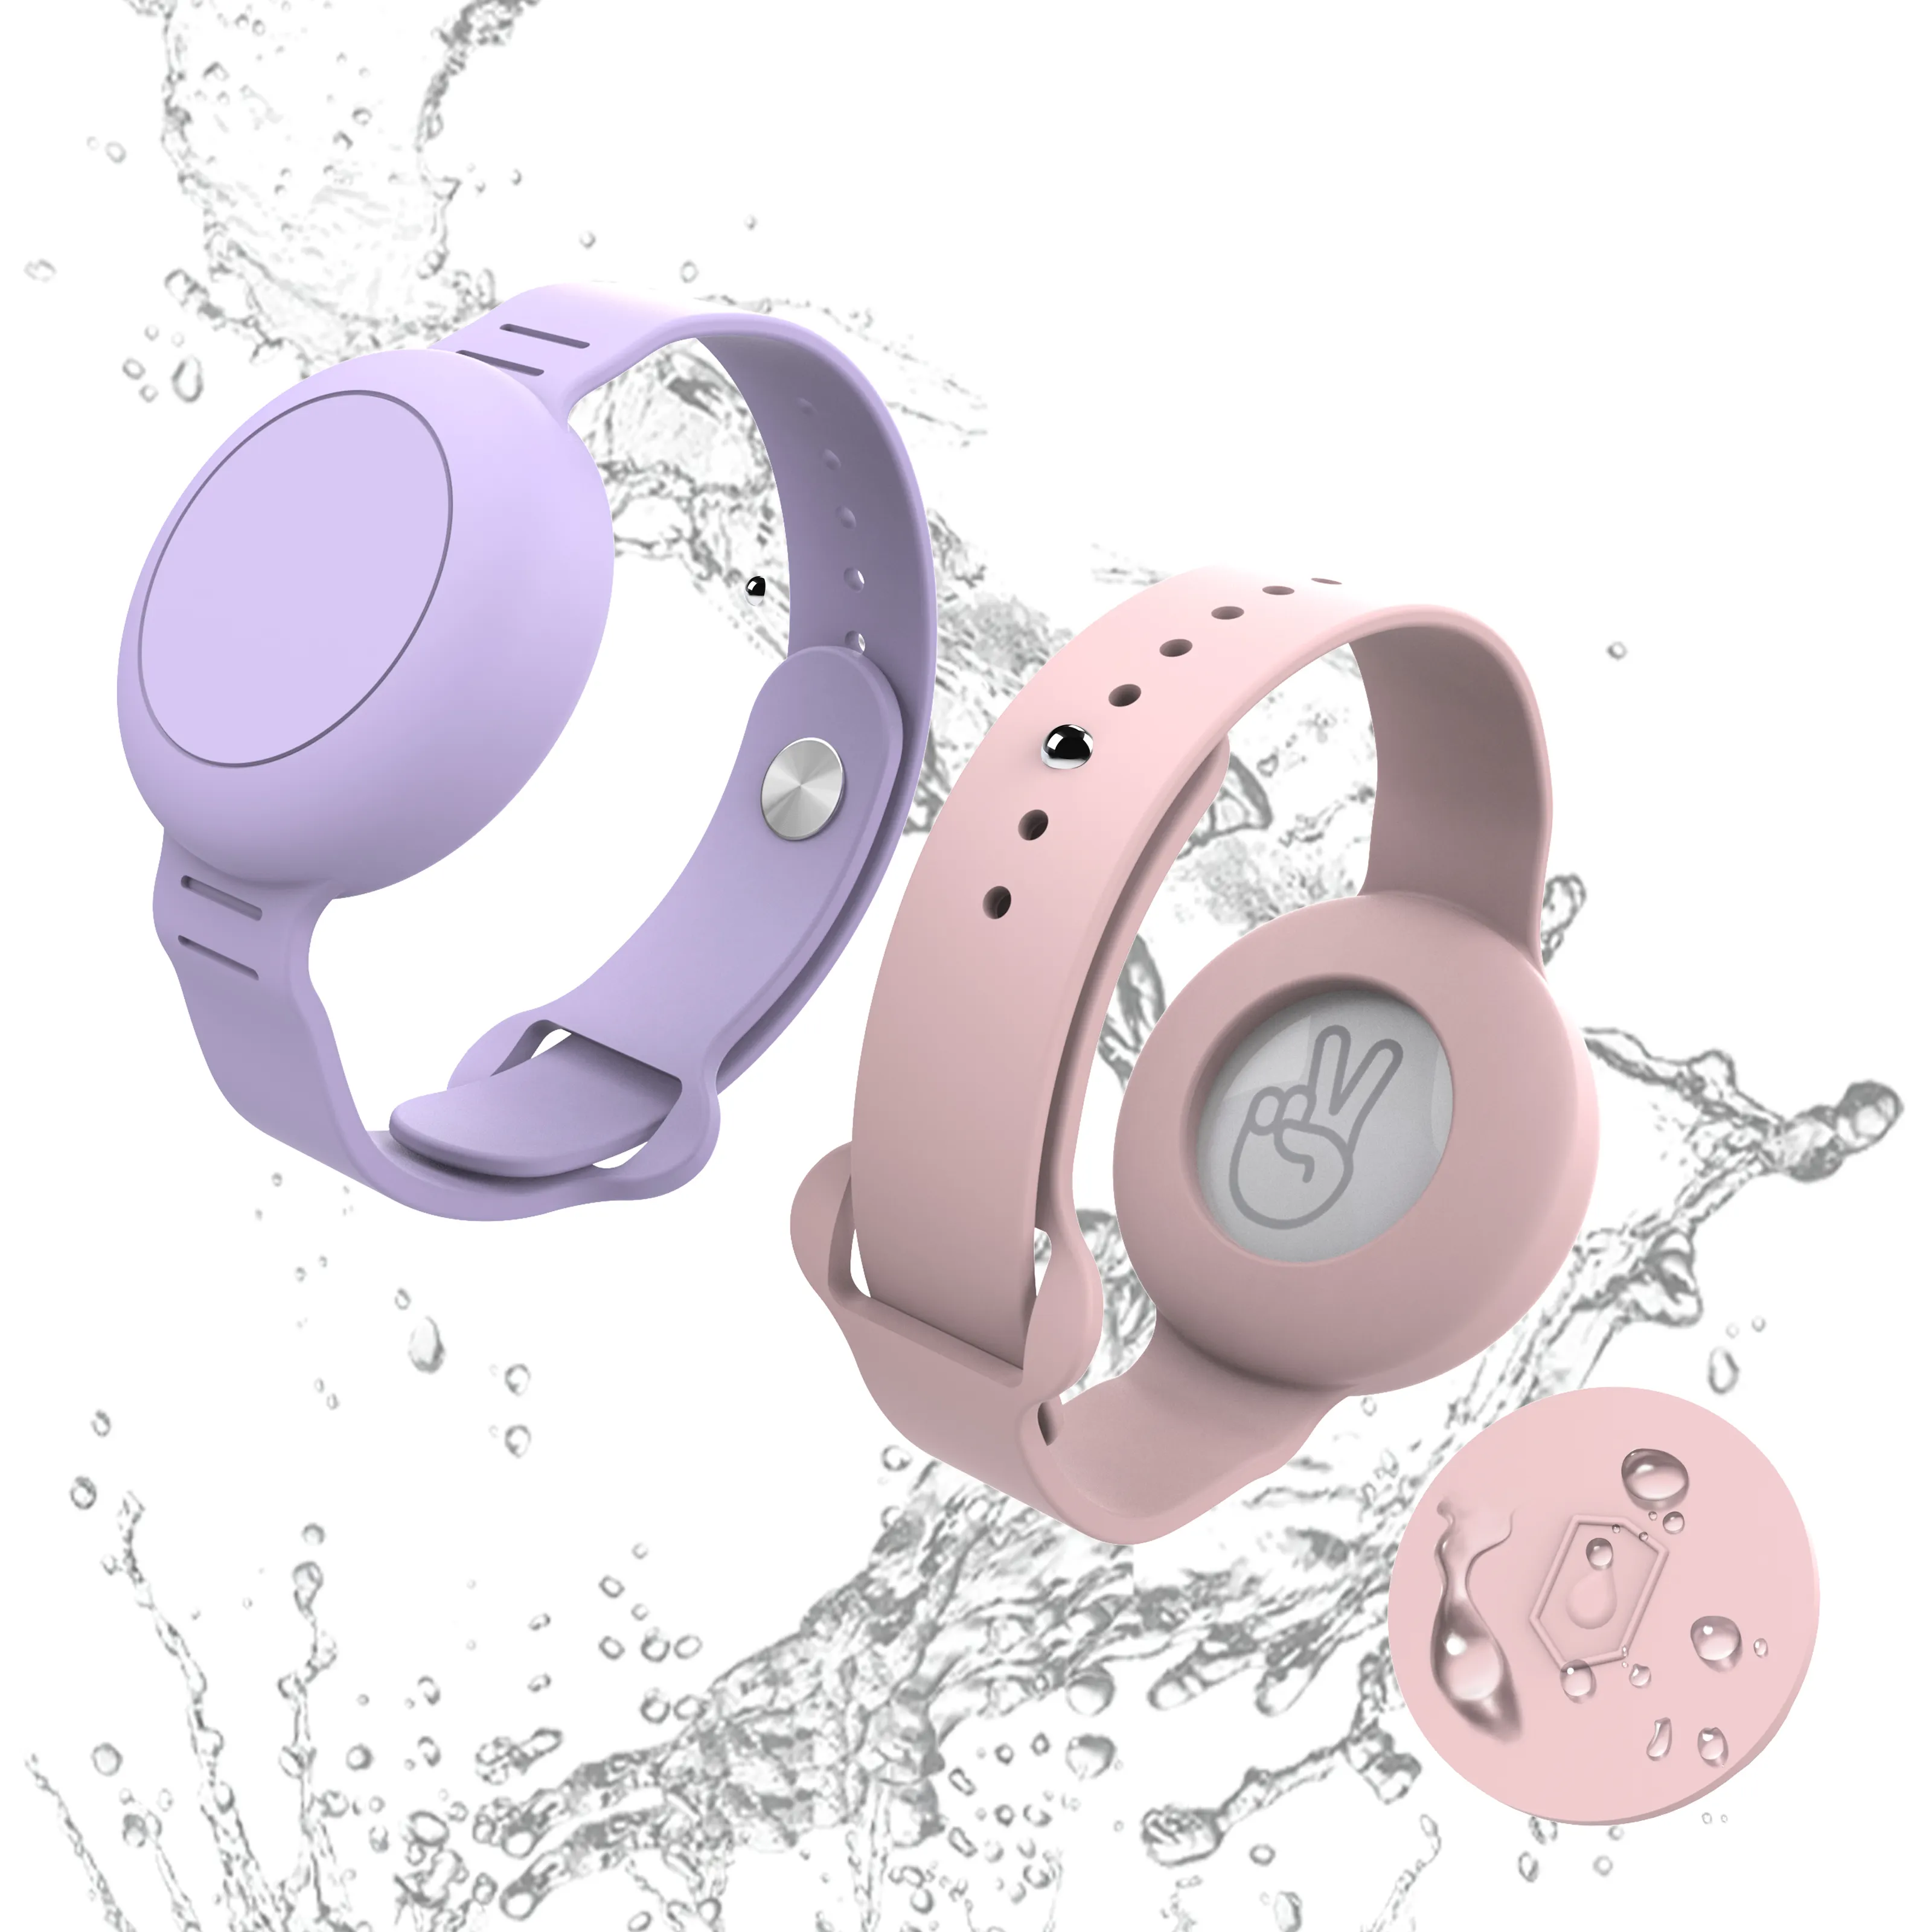 Small Summer Strap for AirTag Waterproof and Shockproof Hot Selling Item for Young Children and Elder Protective Packaging